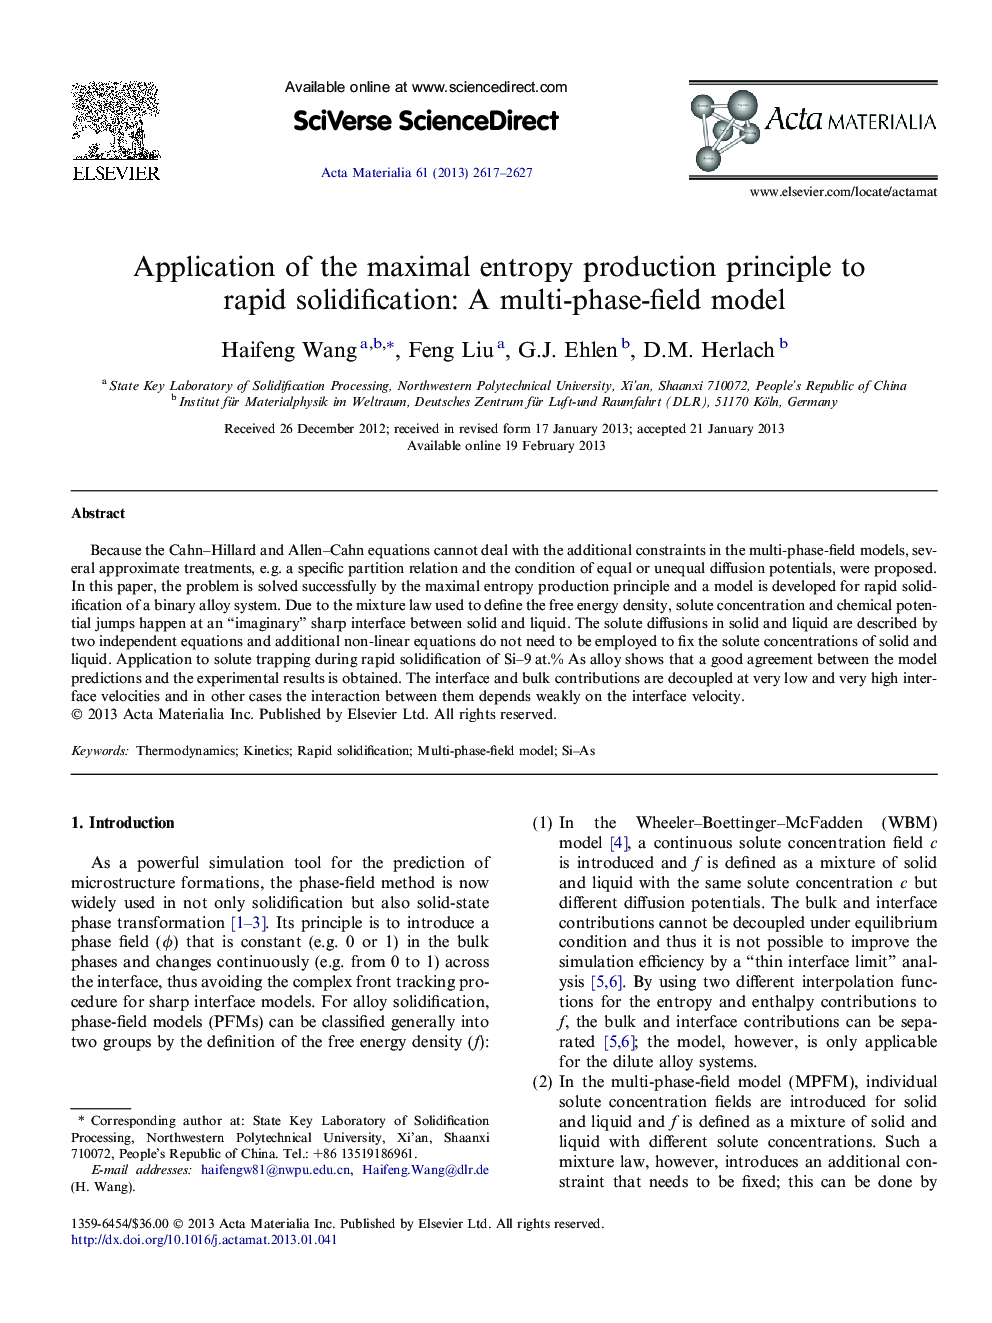 Application of the maximal entropy production principle to rapid solidification: A multi-phase-field model